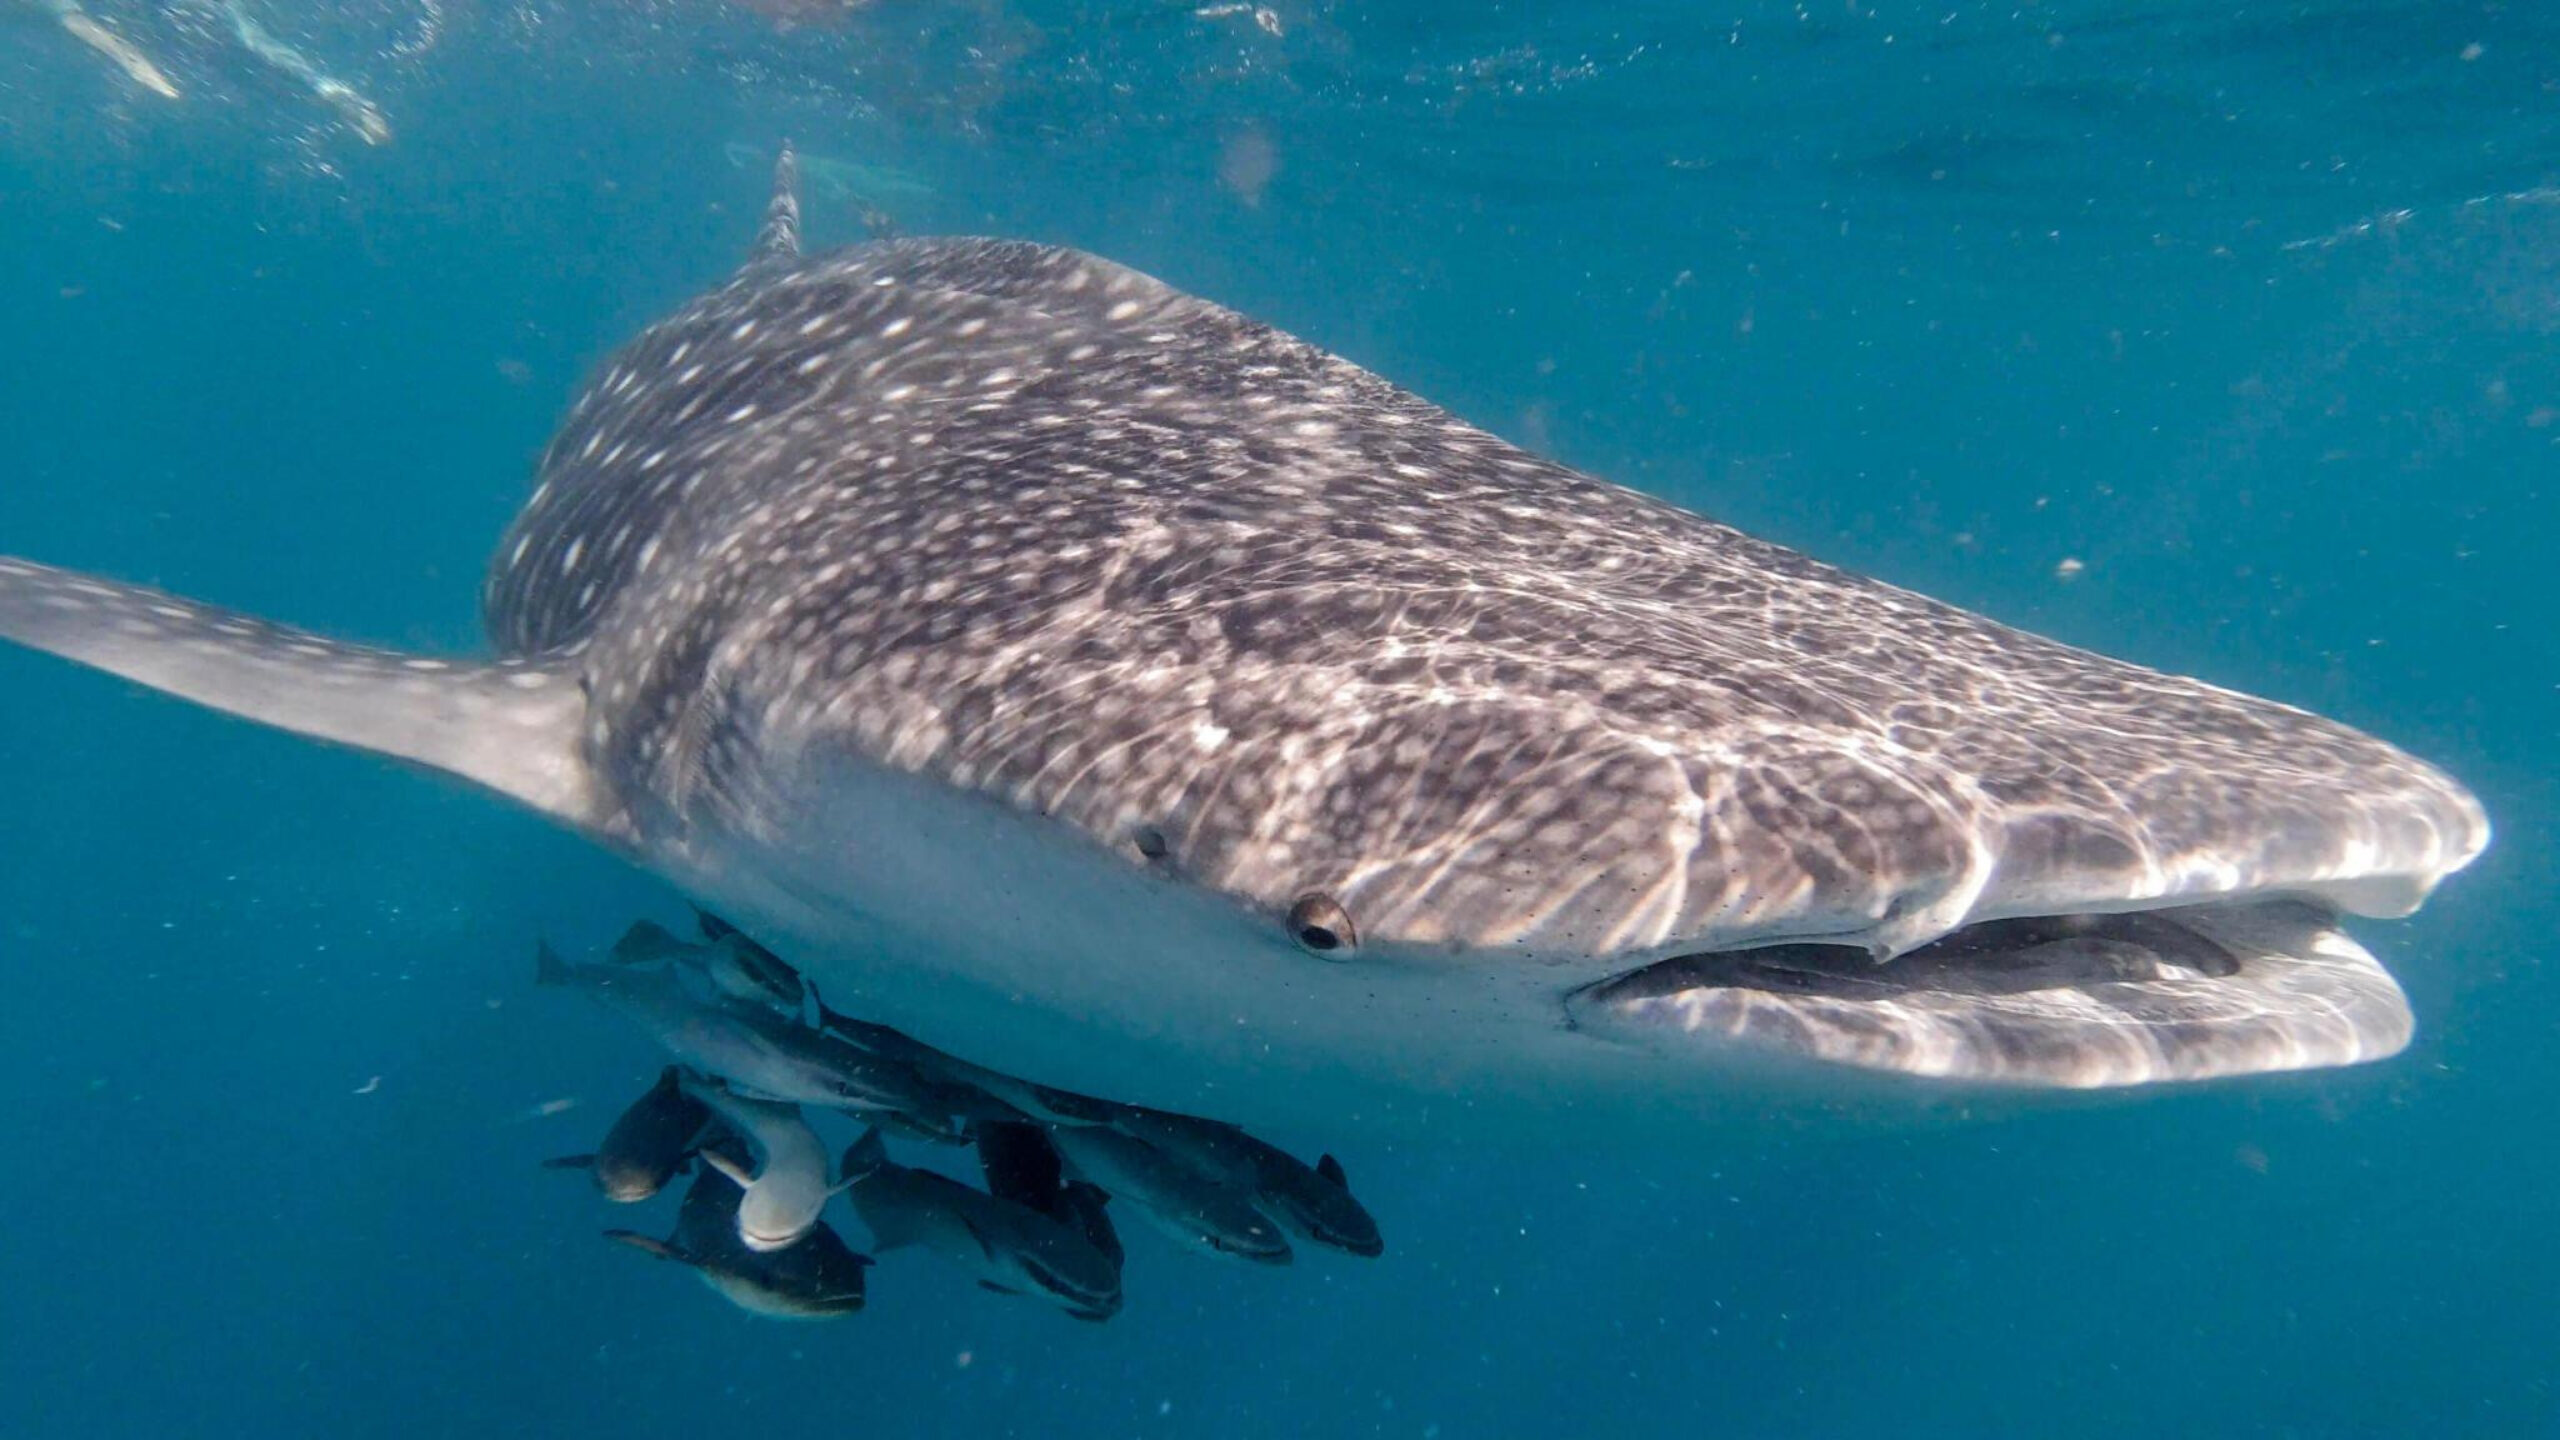  Whale Shark (Rhincodon typus) swimming in the Andaman sea - Photo by Istock at Istock
